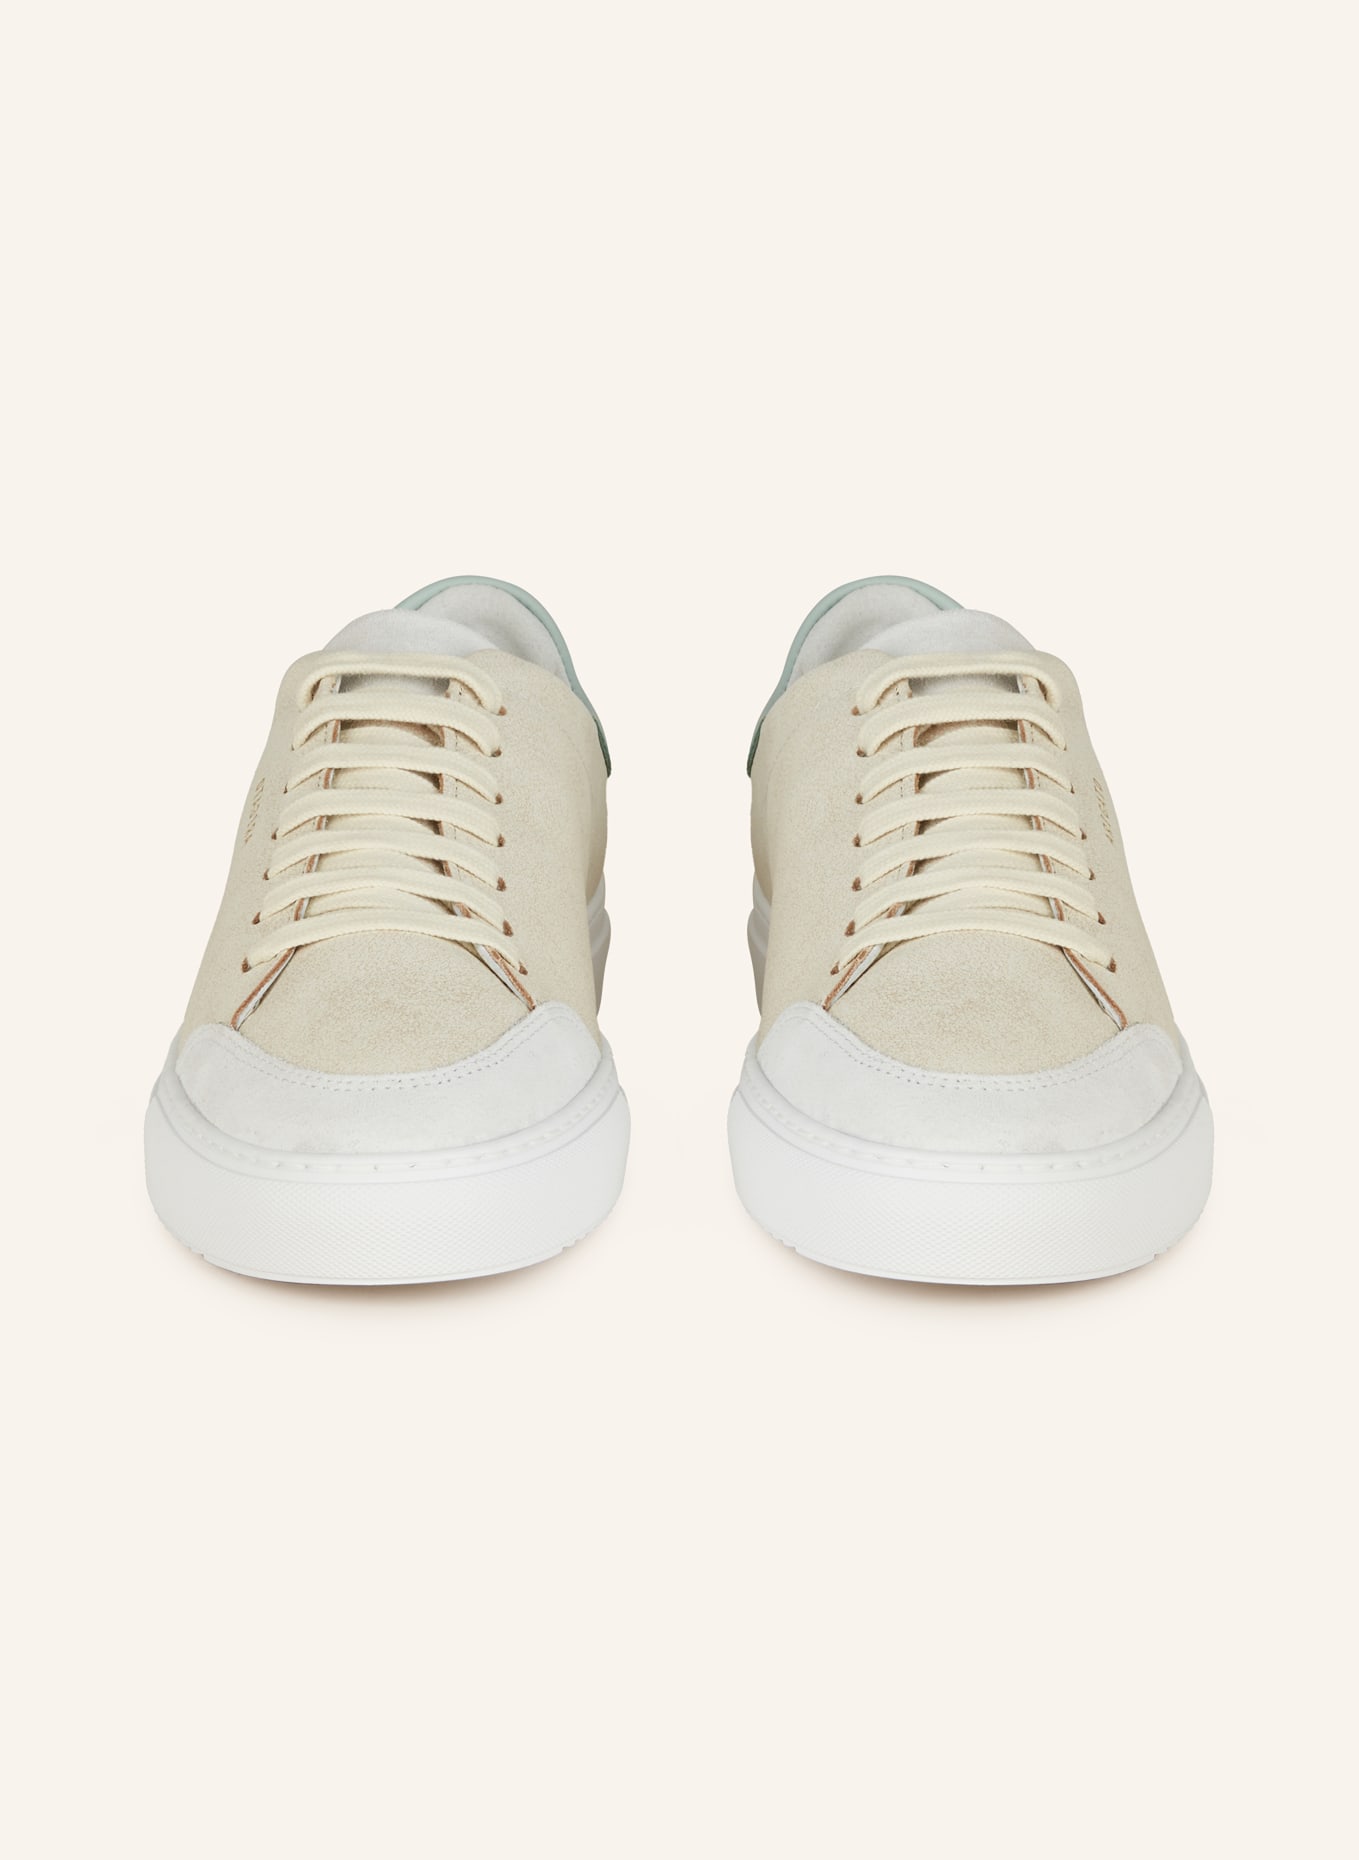 AXEL ARIGATO Sneakers CLEAN, Color: BEIGE/ LIGHT GRAY (Image 3)